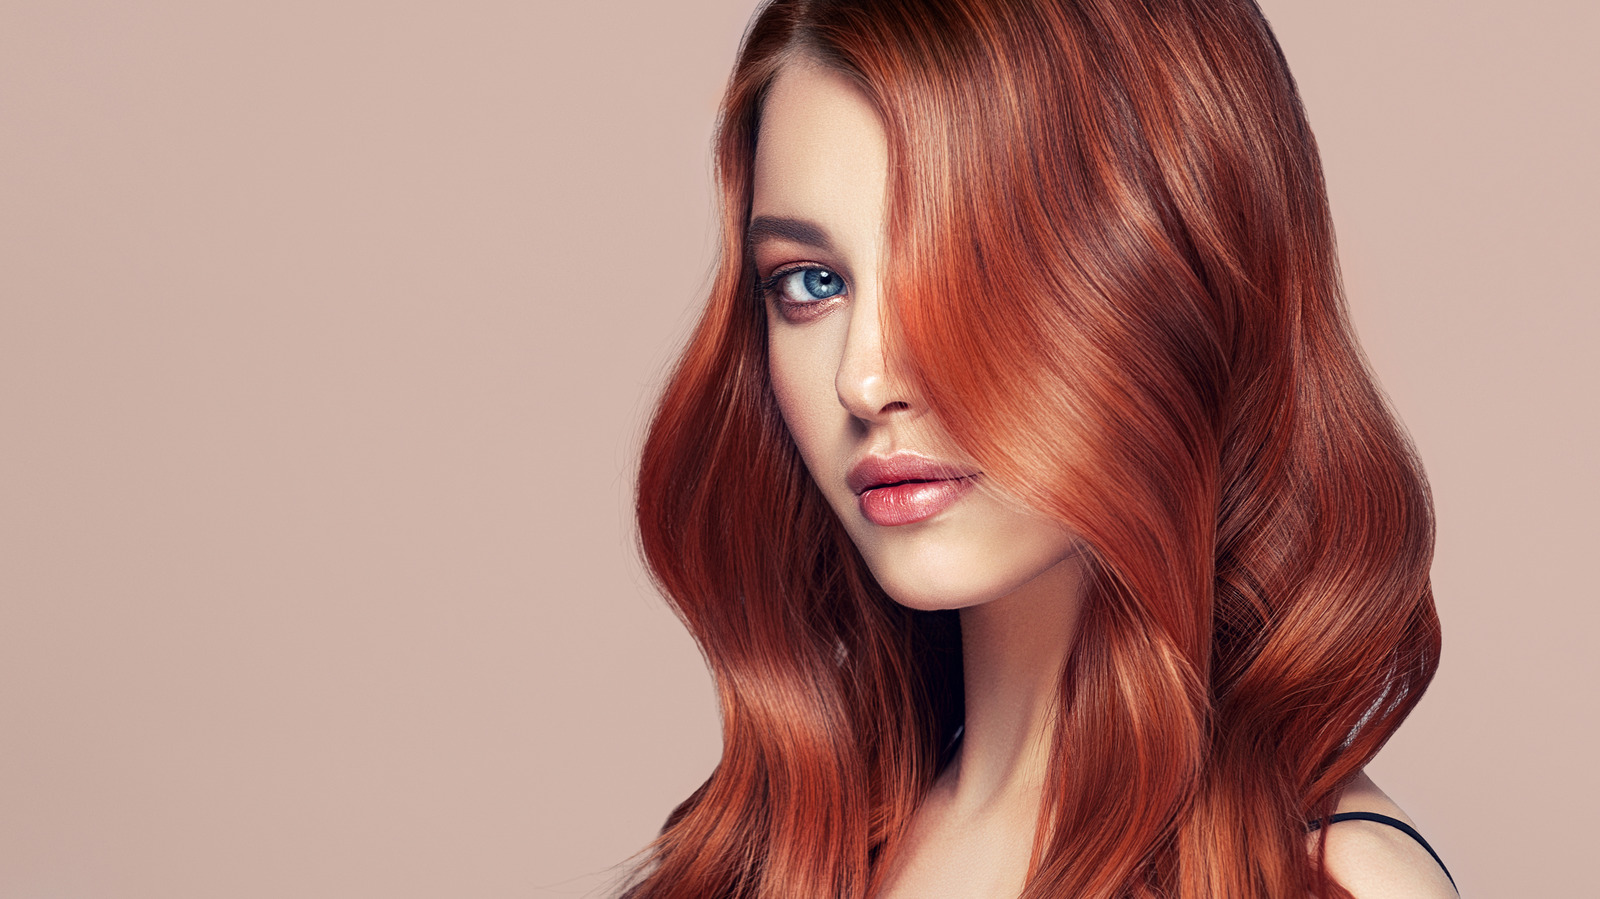 Here's The Way Take Care Of Your Red Hair